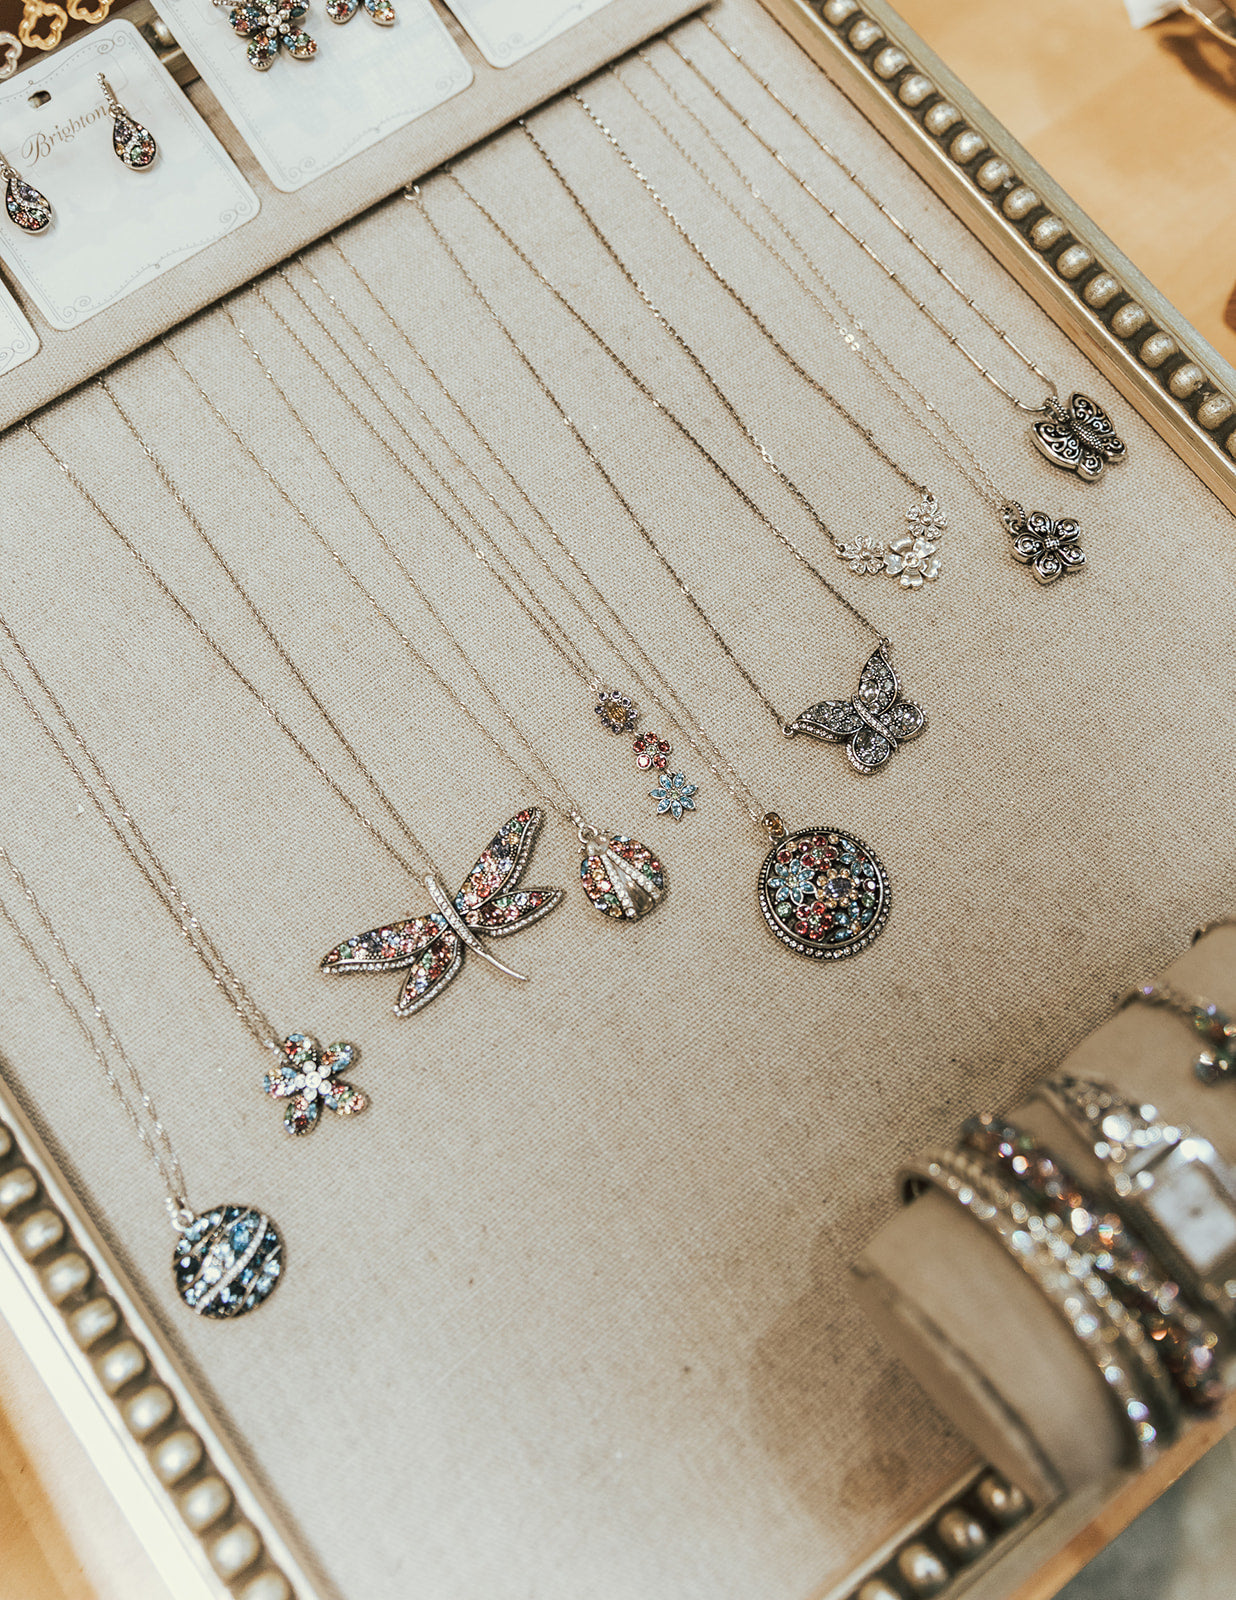 How to Clean Brighton Jewelry in 4 Simple Steps